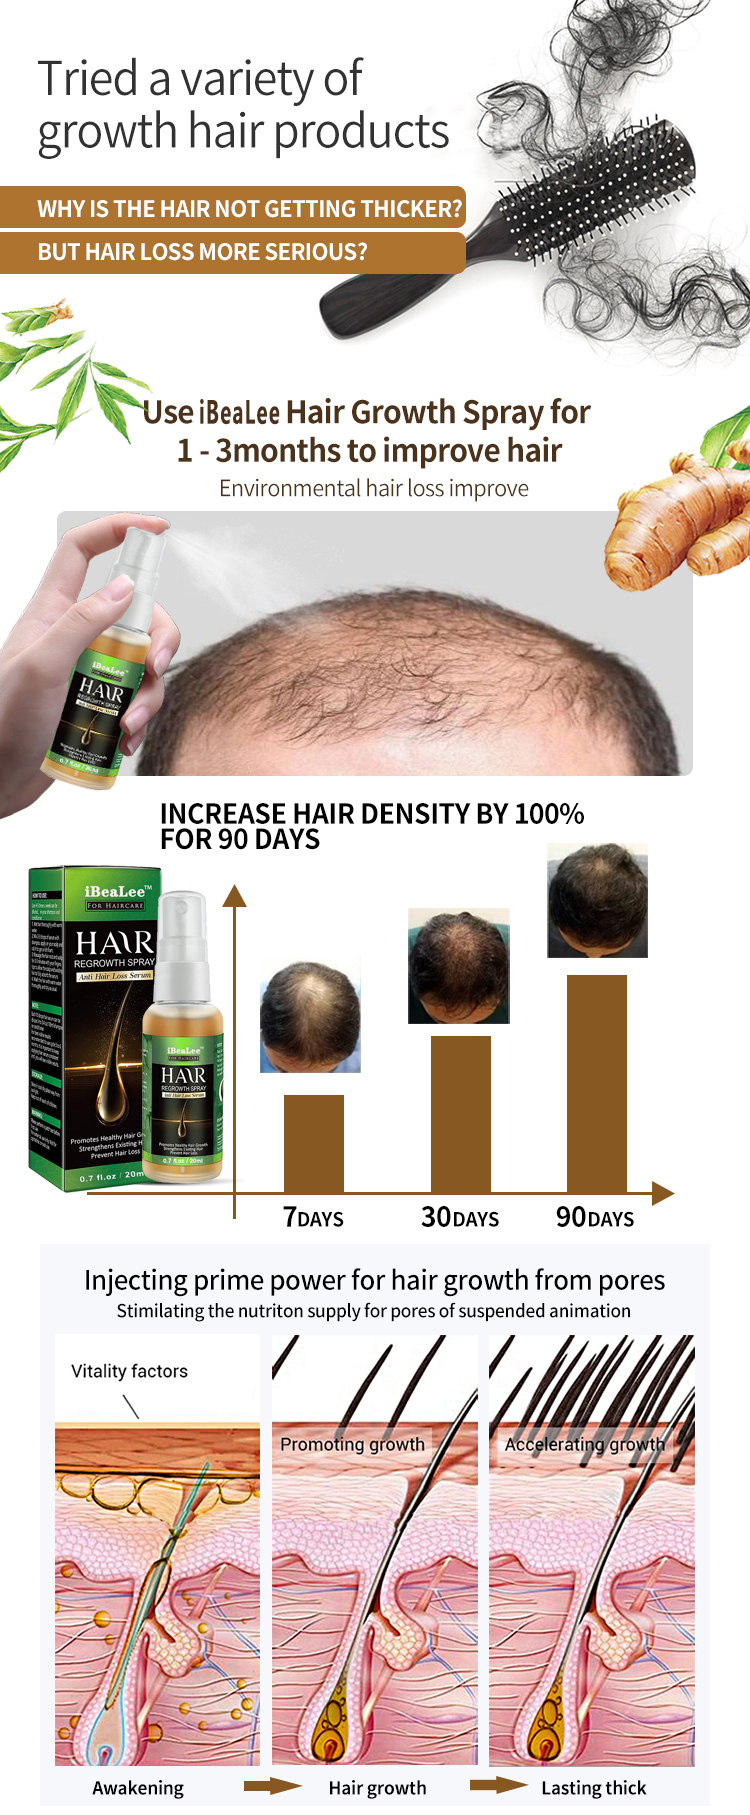 Ginger Hair Growth Products Fast Growing Hair Essential Oil Beauty Hair Care Prevent Hair Loss